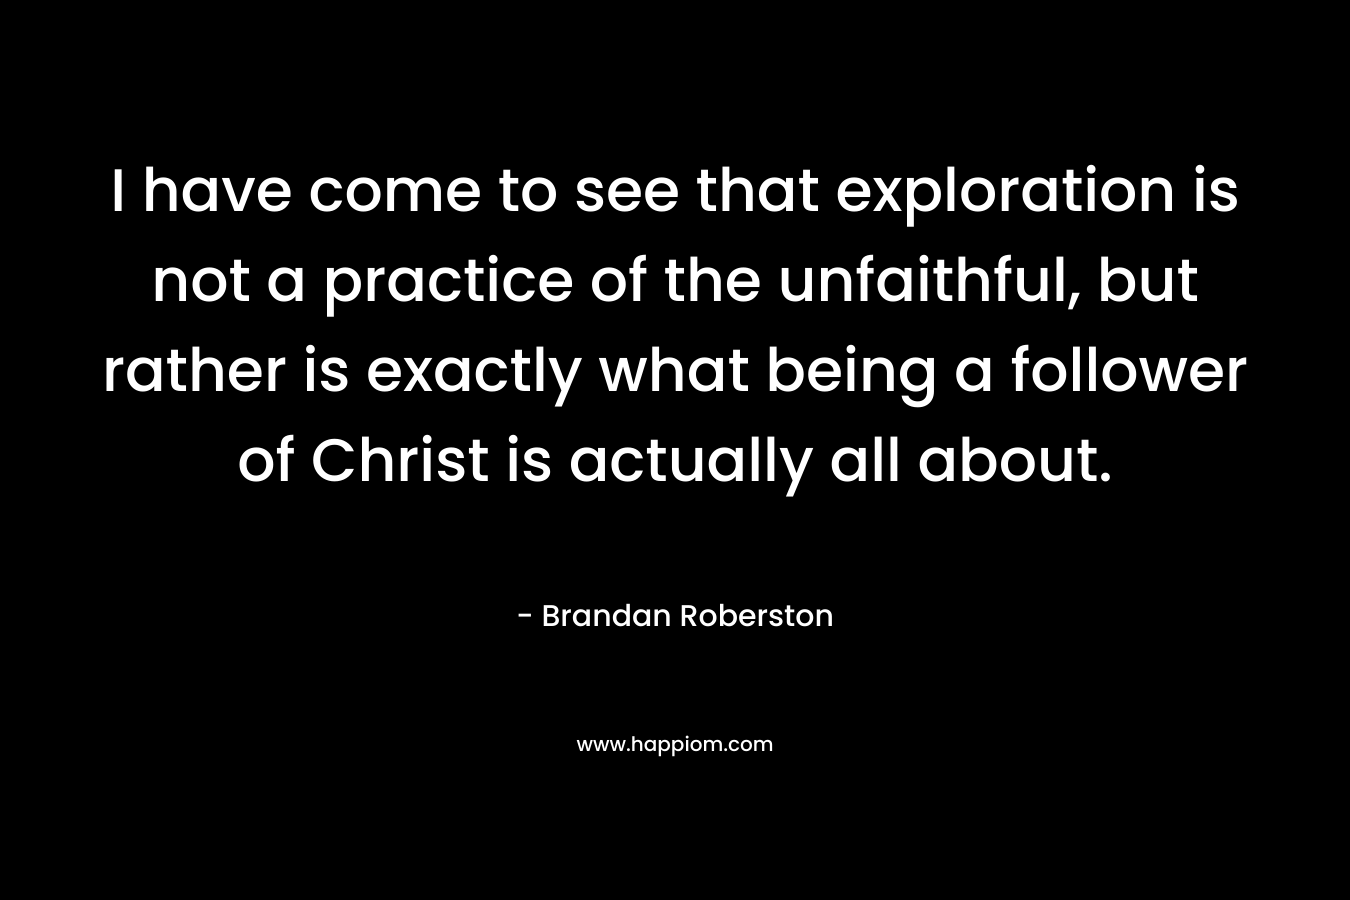 I have come to see that exploration is not a practice of the unfaithful, but rather is exactly what being a follower of Christ is actually all about. – Brandan Roberston